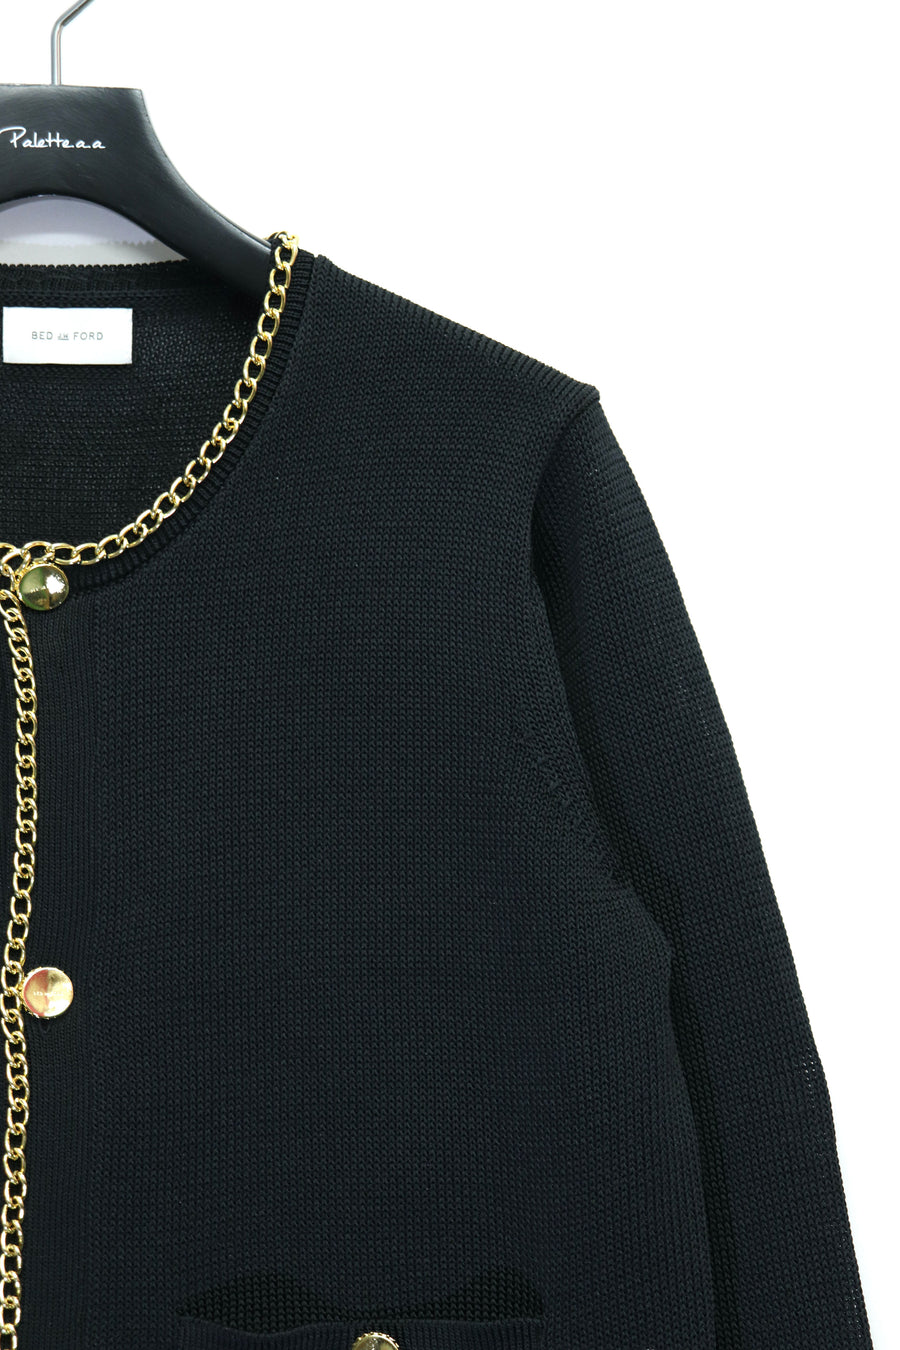 BED j.w. FORD  Chain Knit Cardigan